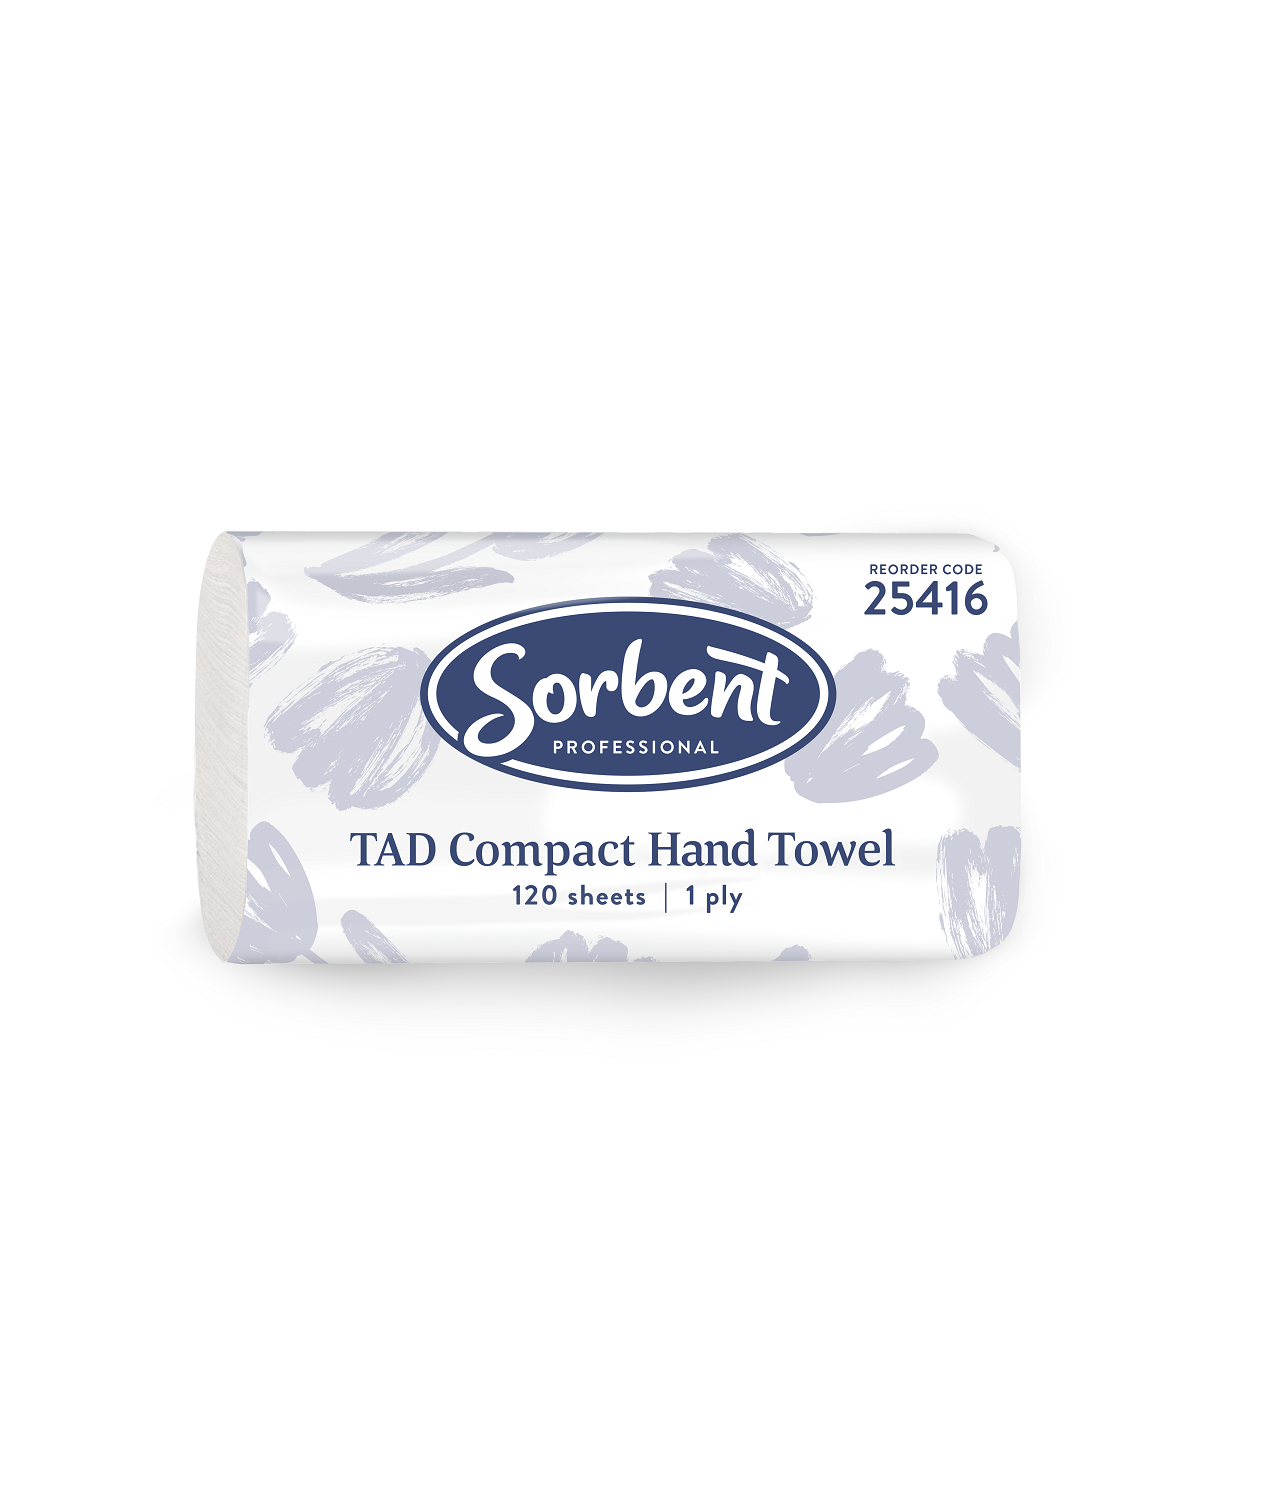 Compact TAD Hand Towel 1ply 120 sheets (1416 replacement)